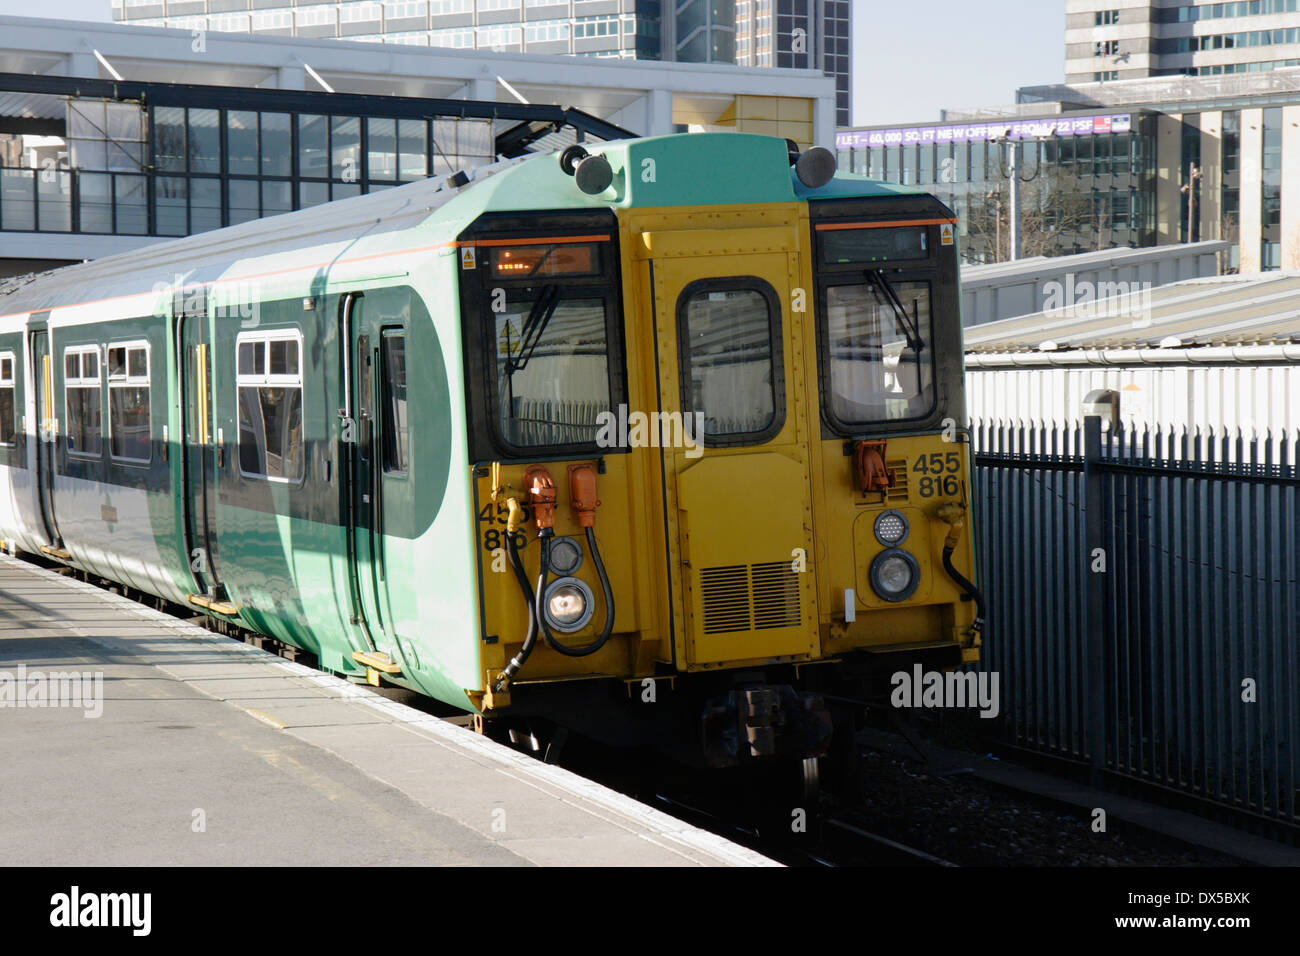 Class 455/8 Electric Multiple Unit 455816 in Southern livery leaving East Croydon station Stock Photo